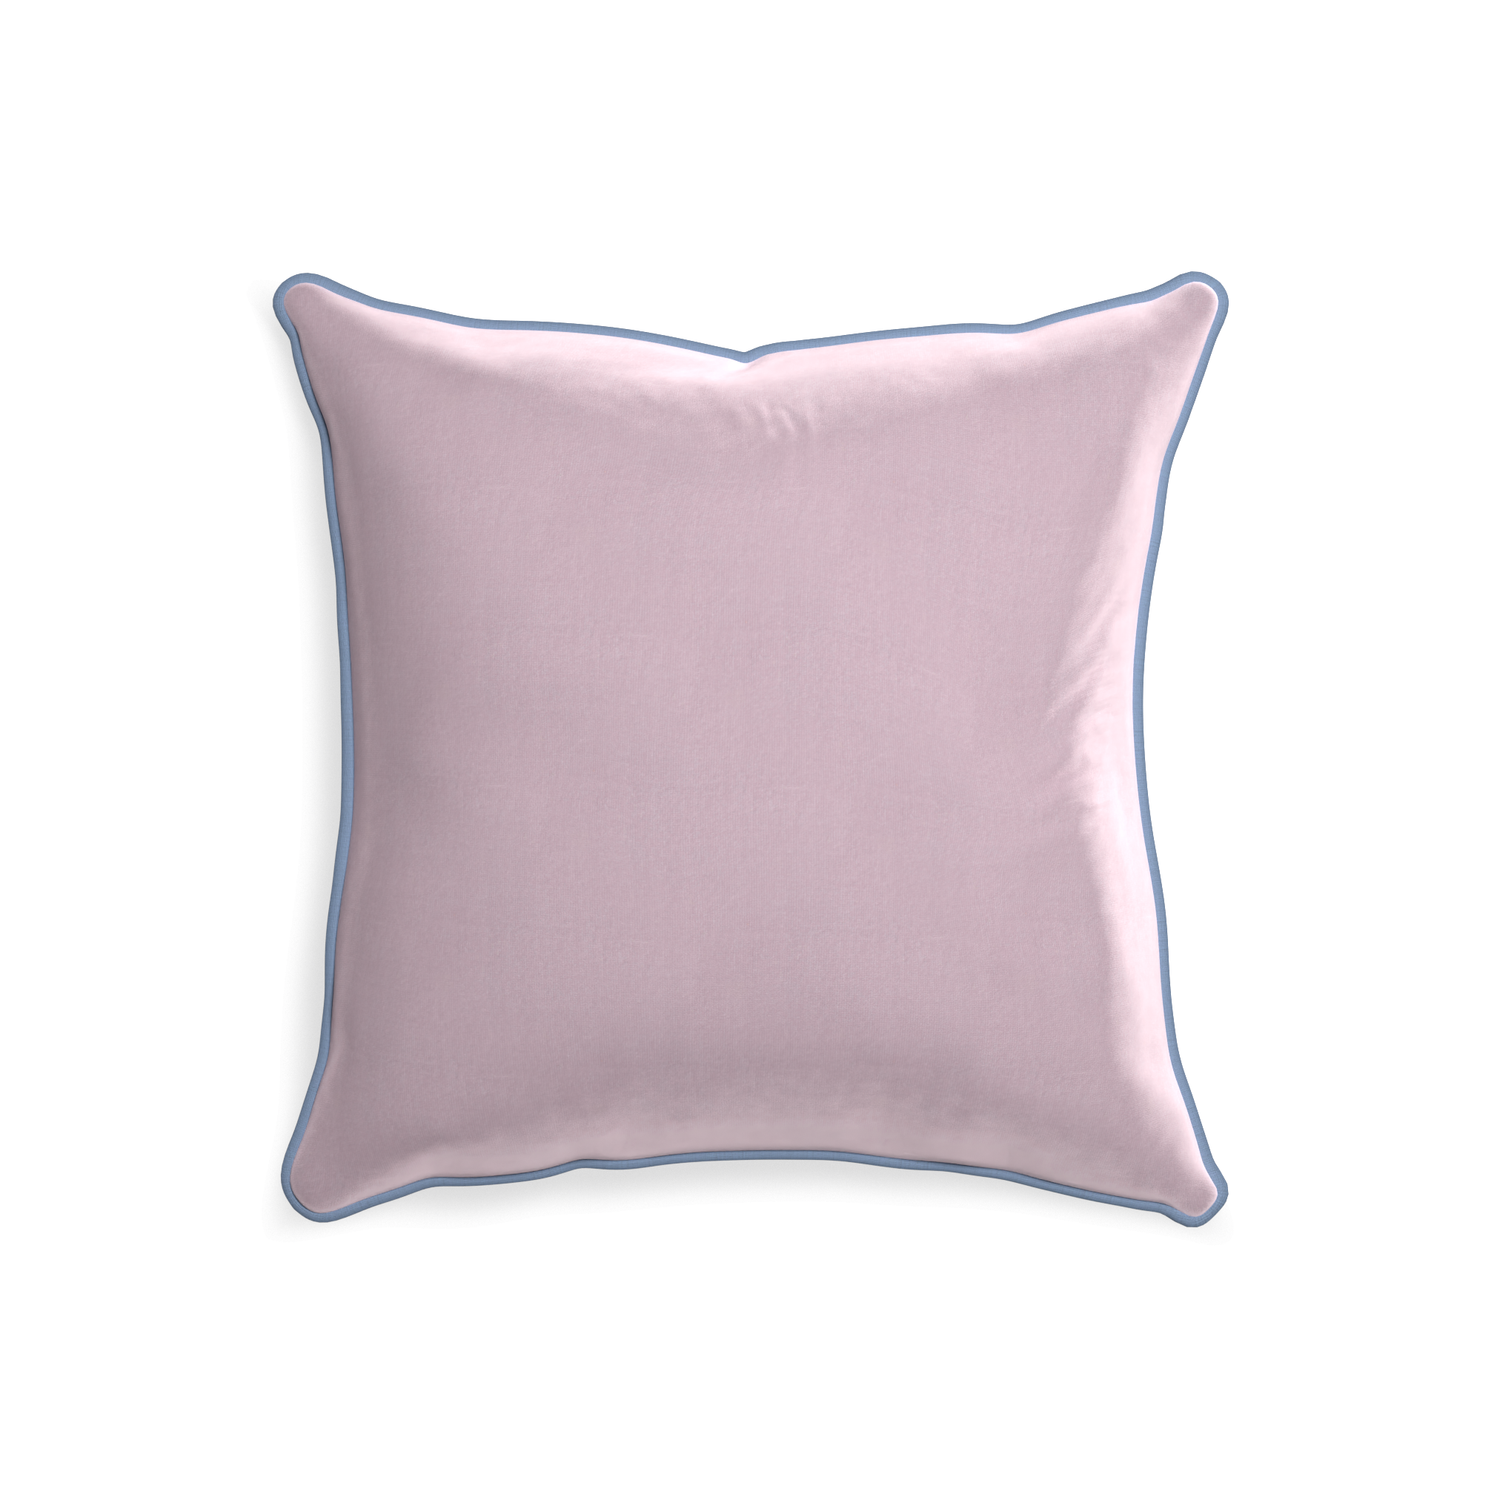 20-square lilac velvet custom lilacpillow with sky piping on white background